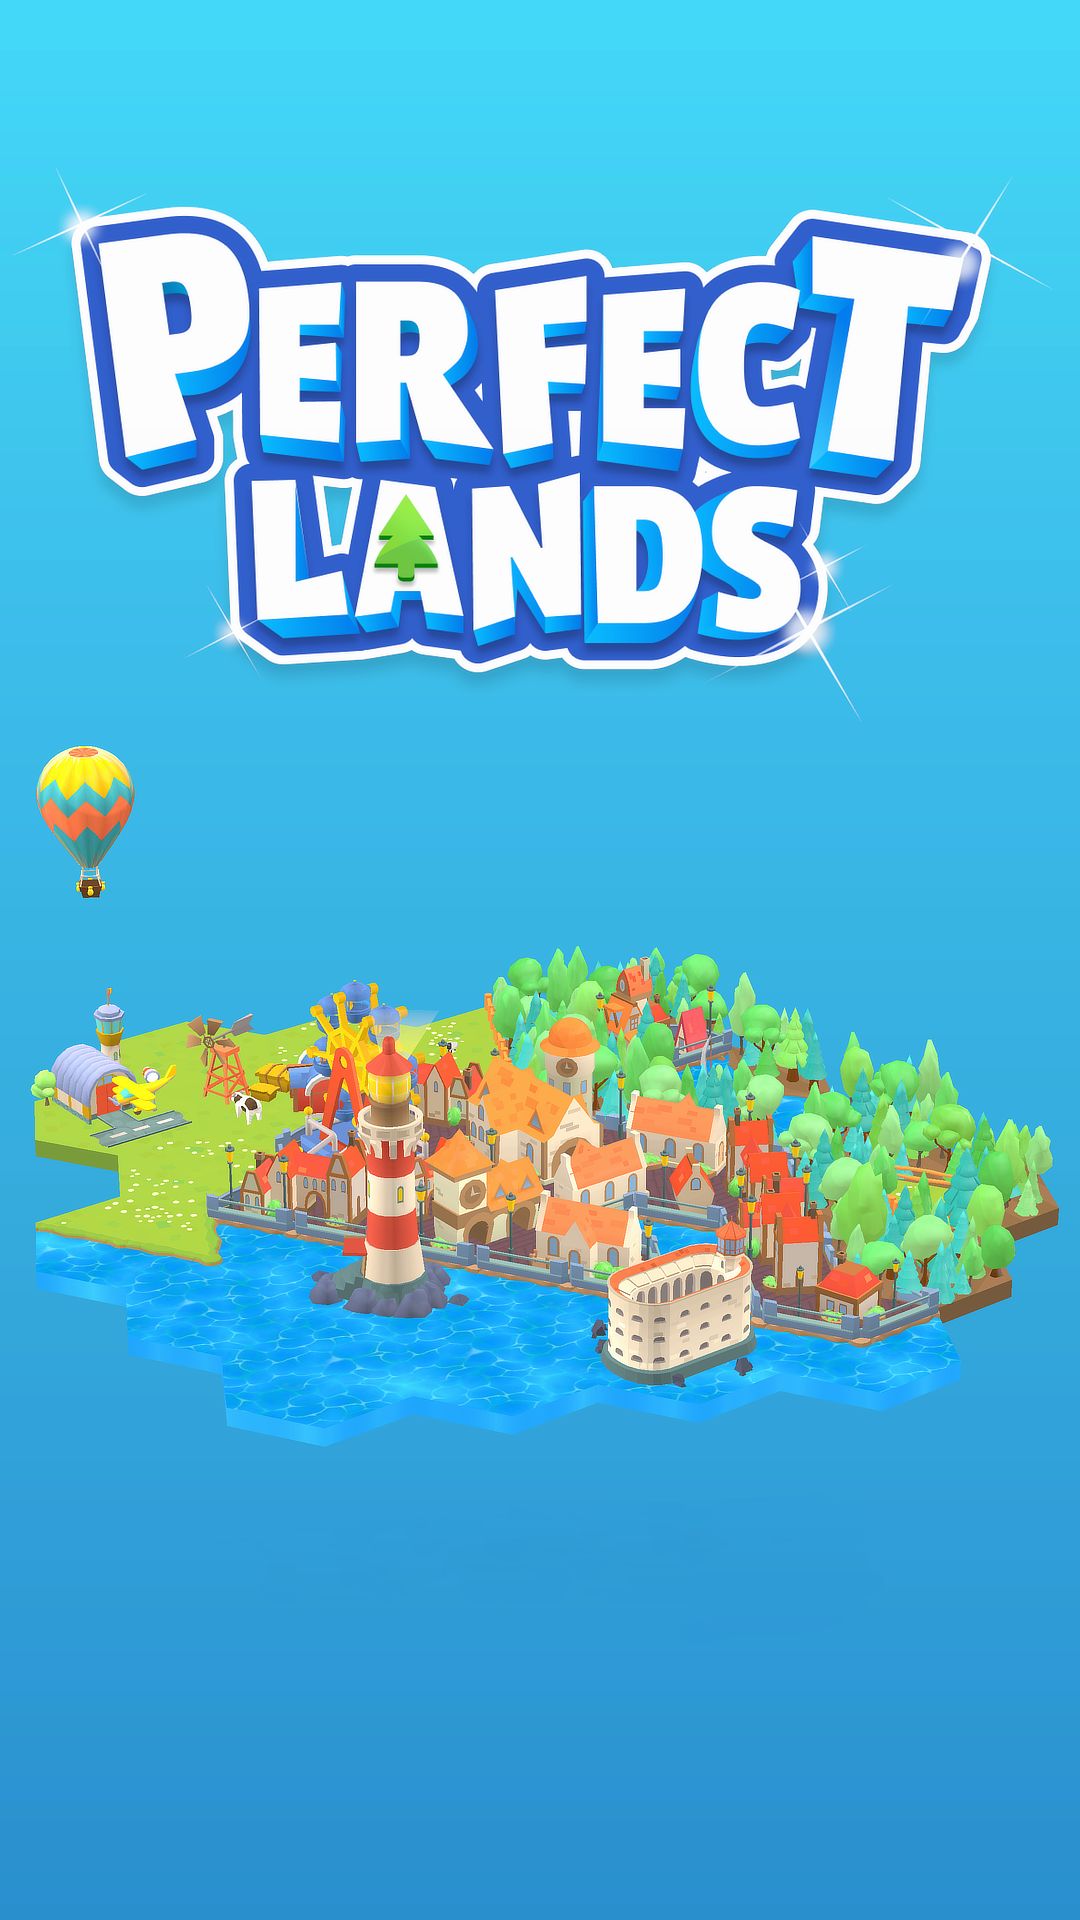 Perfect Lands